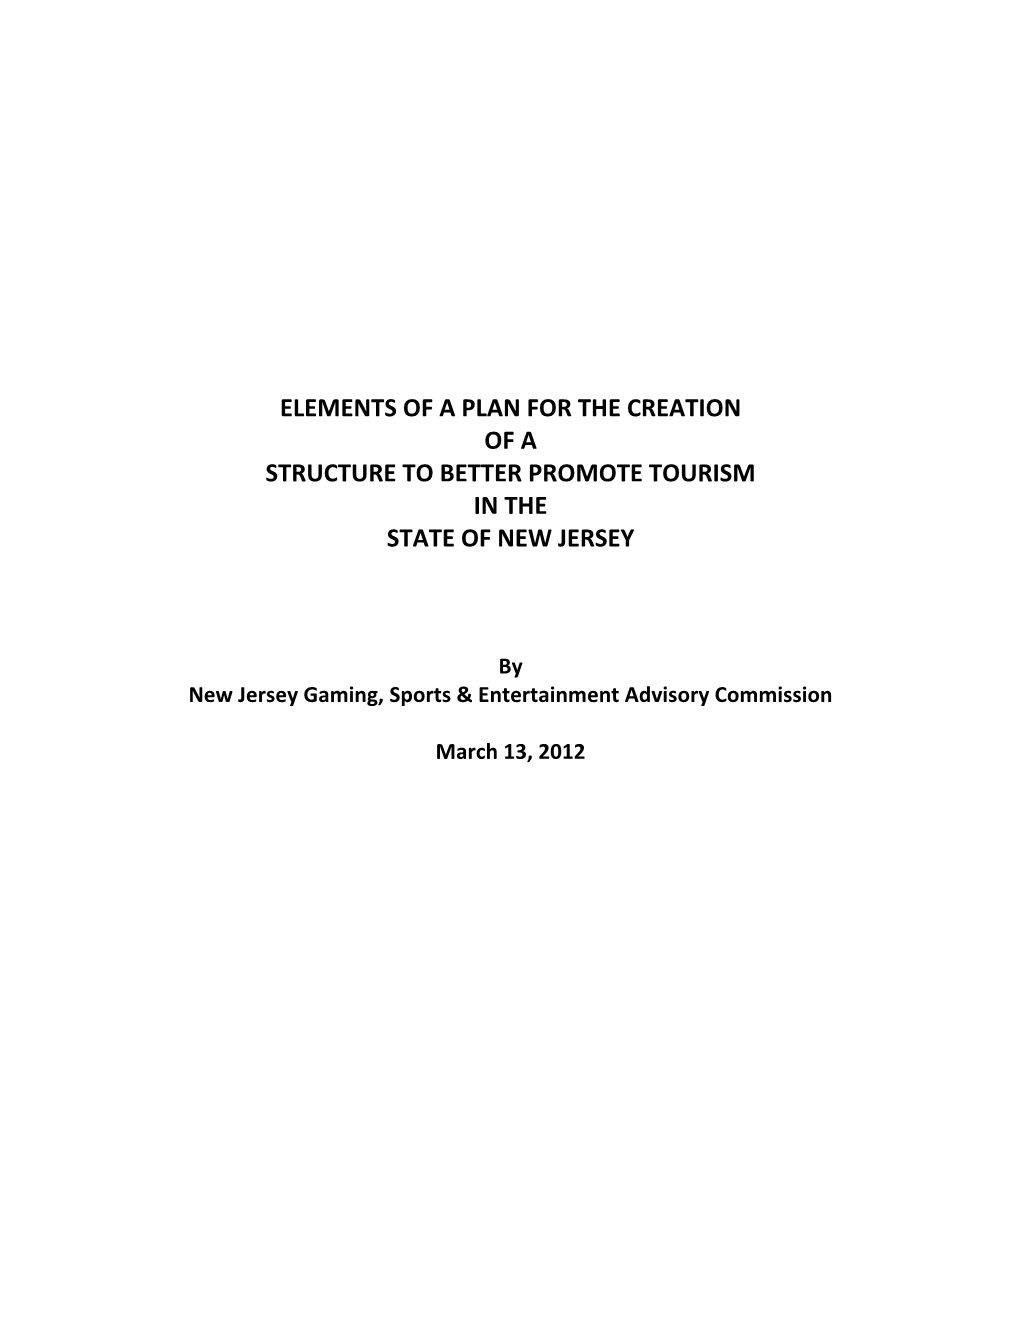 Elements of a Plan for the Creation of a Structure to Better Promote Tourism in the State of New Jersey